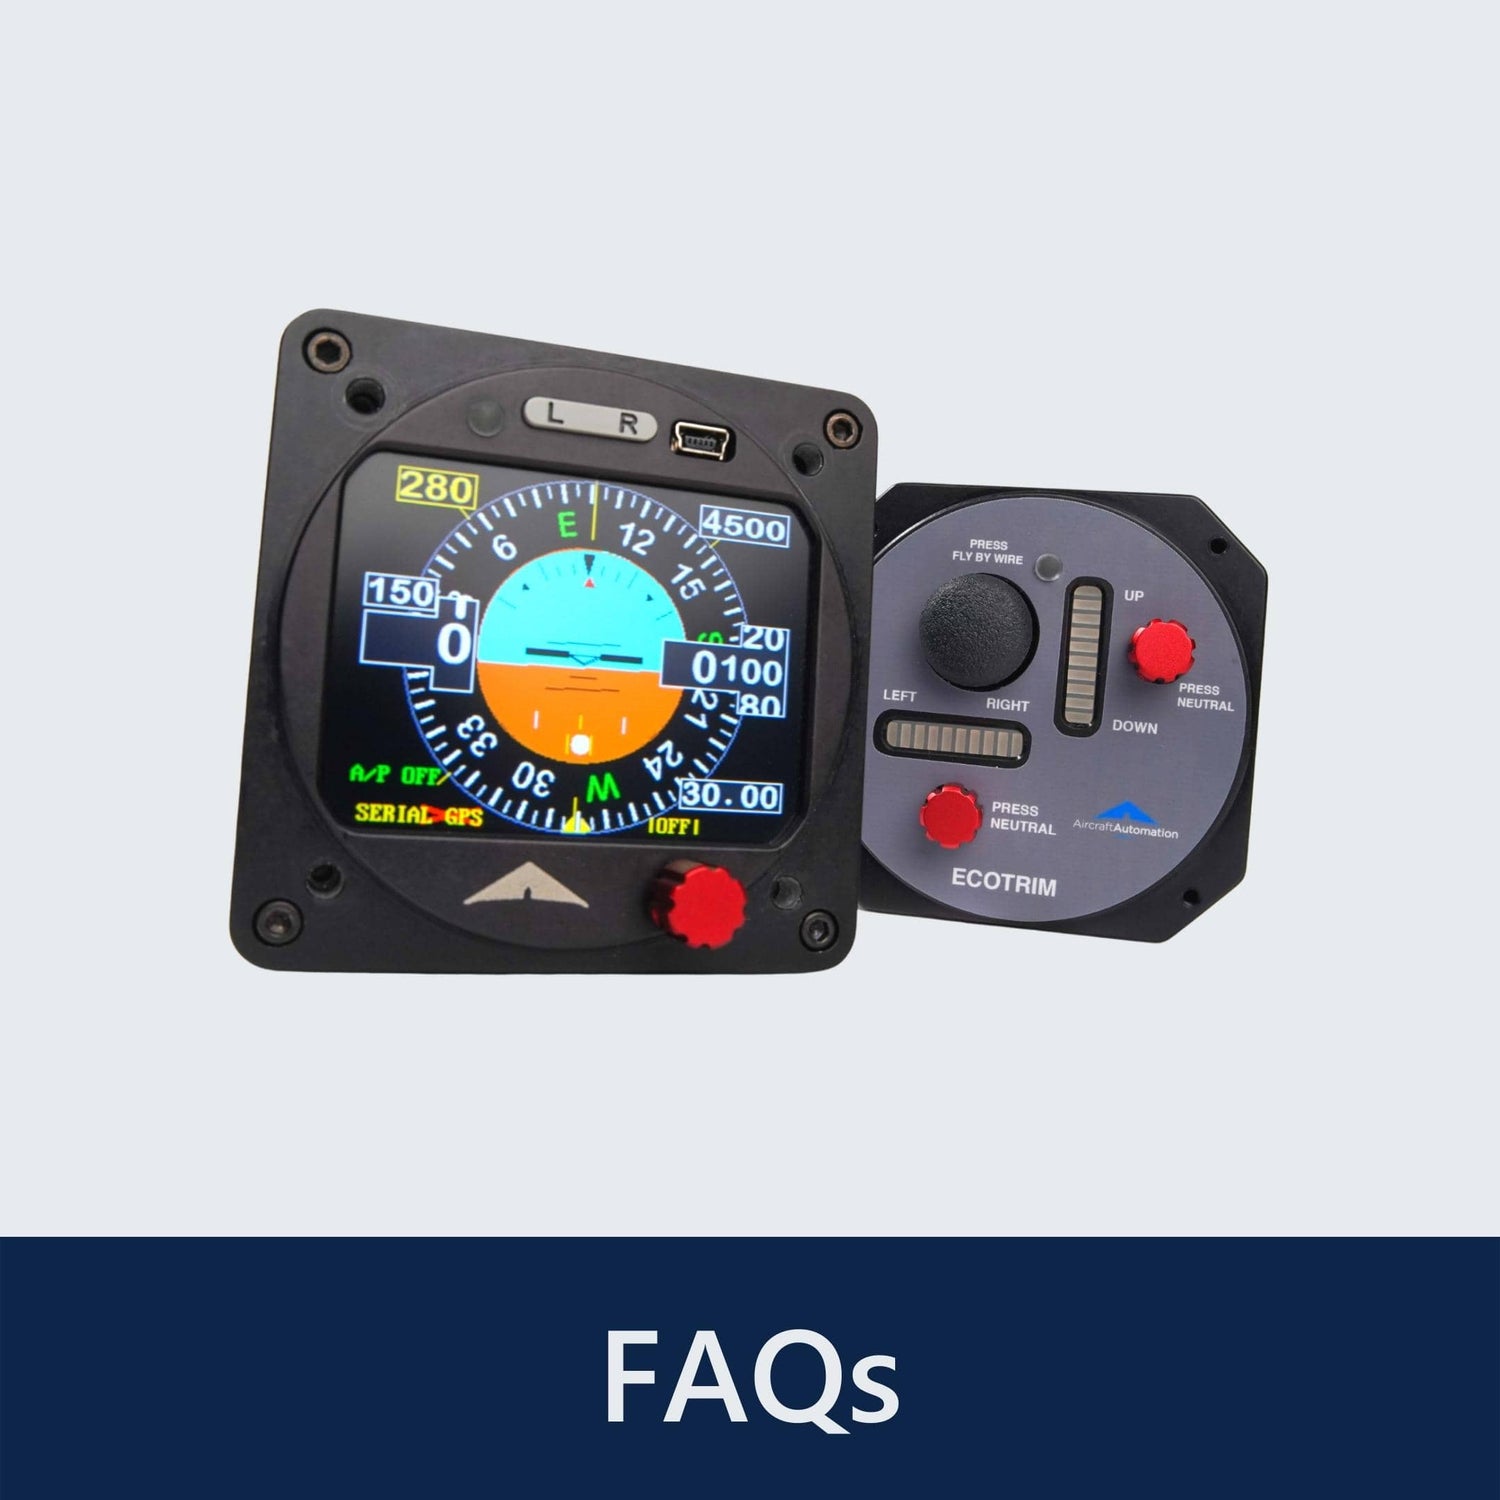 Aircraft Automation Frequently Asked Questions